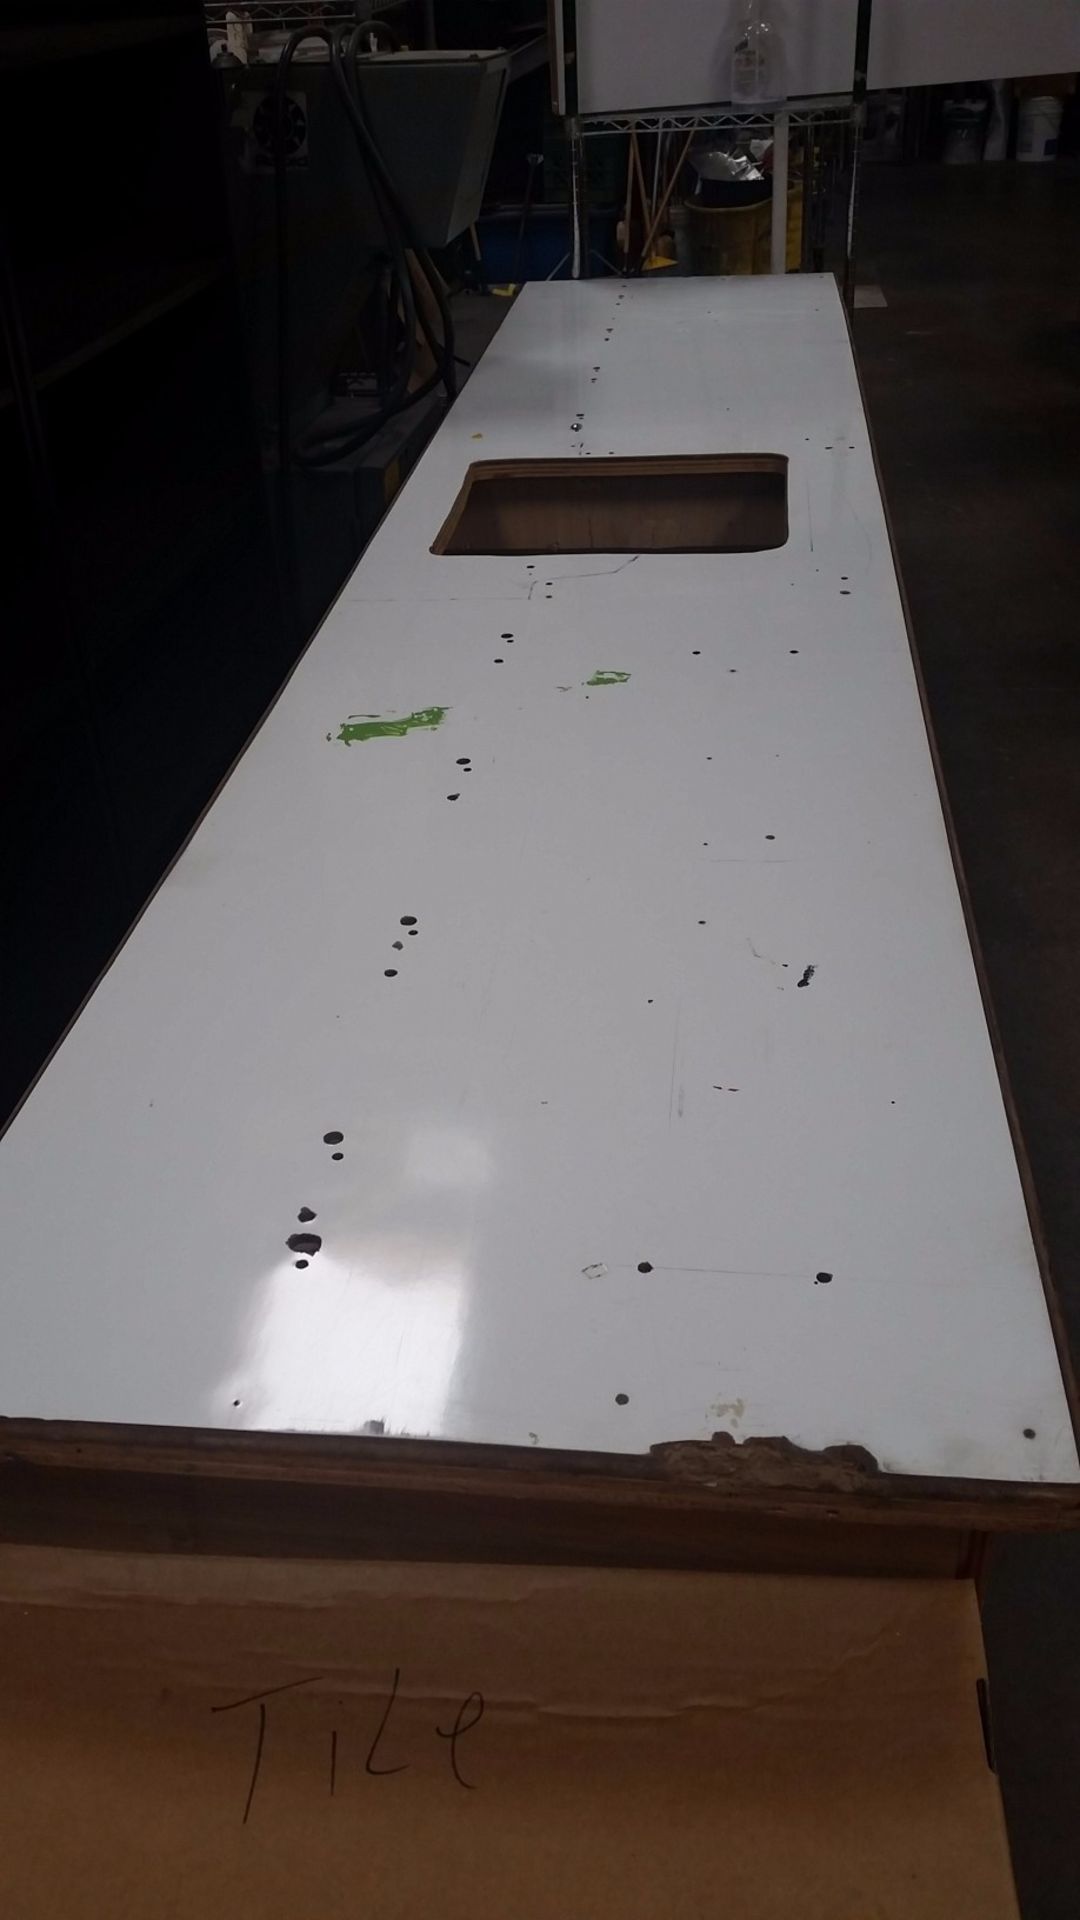 Saw Work Table ,1 USED CHOP SAW /TABLE SAW WORK BENCH 121 1/2" X 26" X 34" (INSERT FOR SAW 16" " X - Image 4 of 6